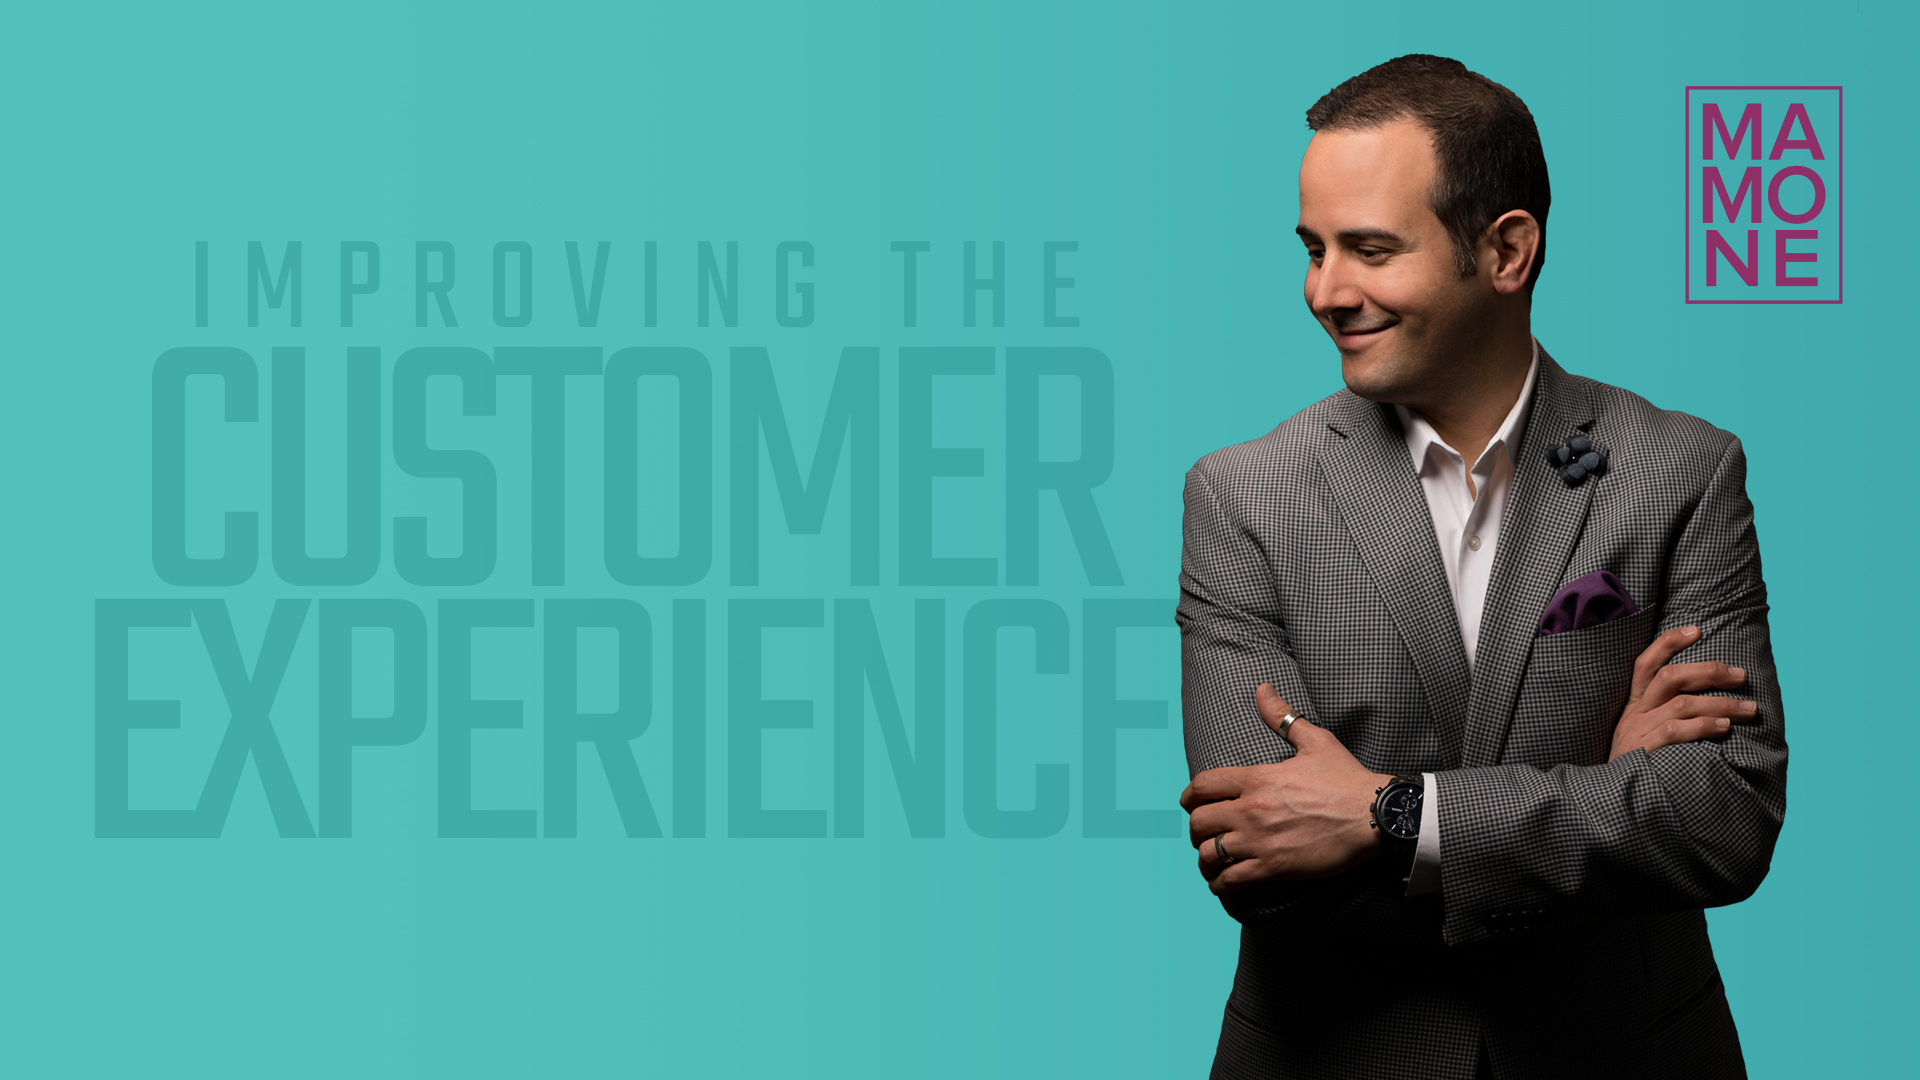 Improving the Customer Service Experience